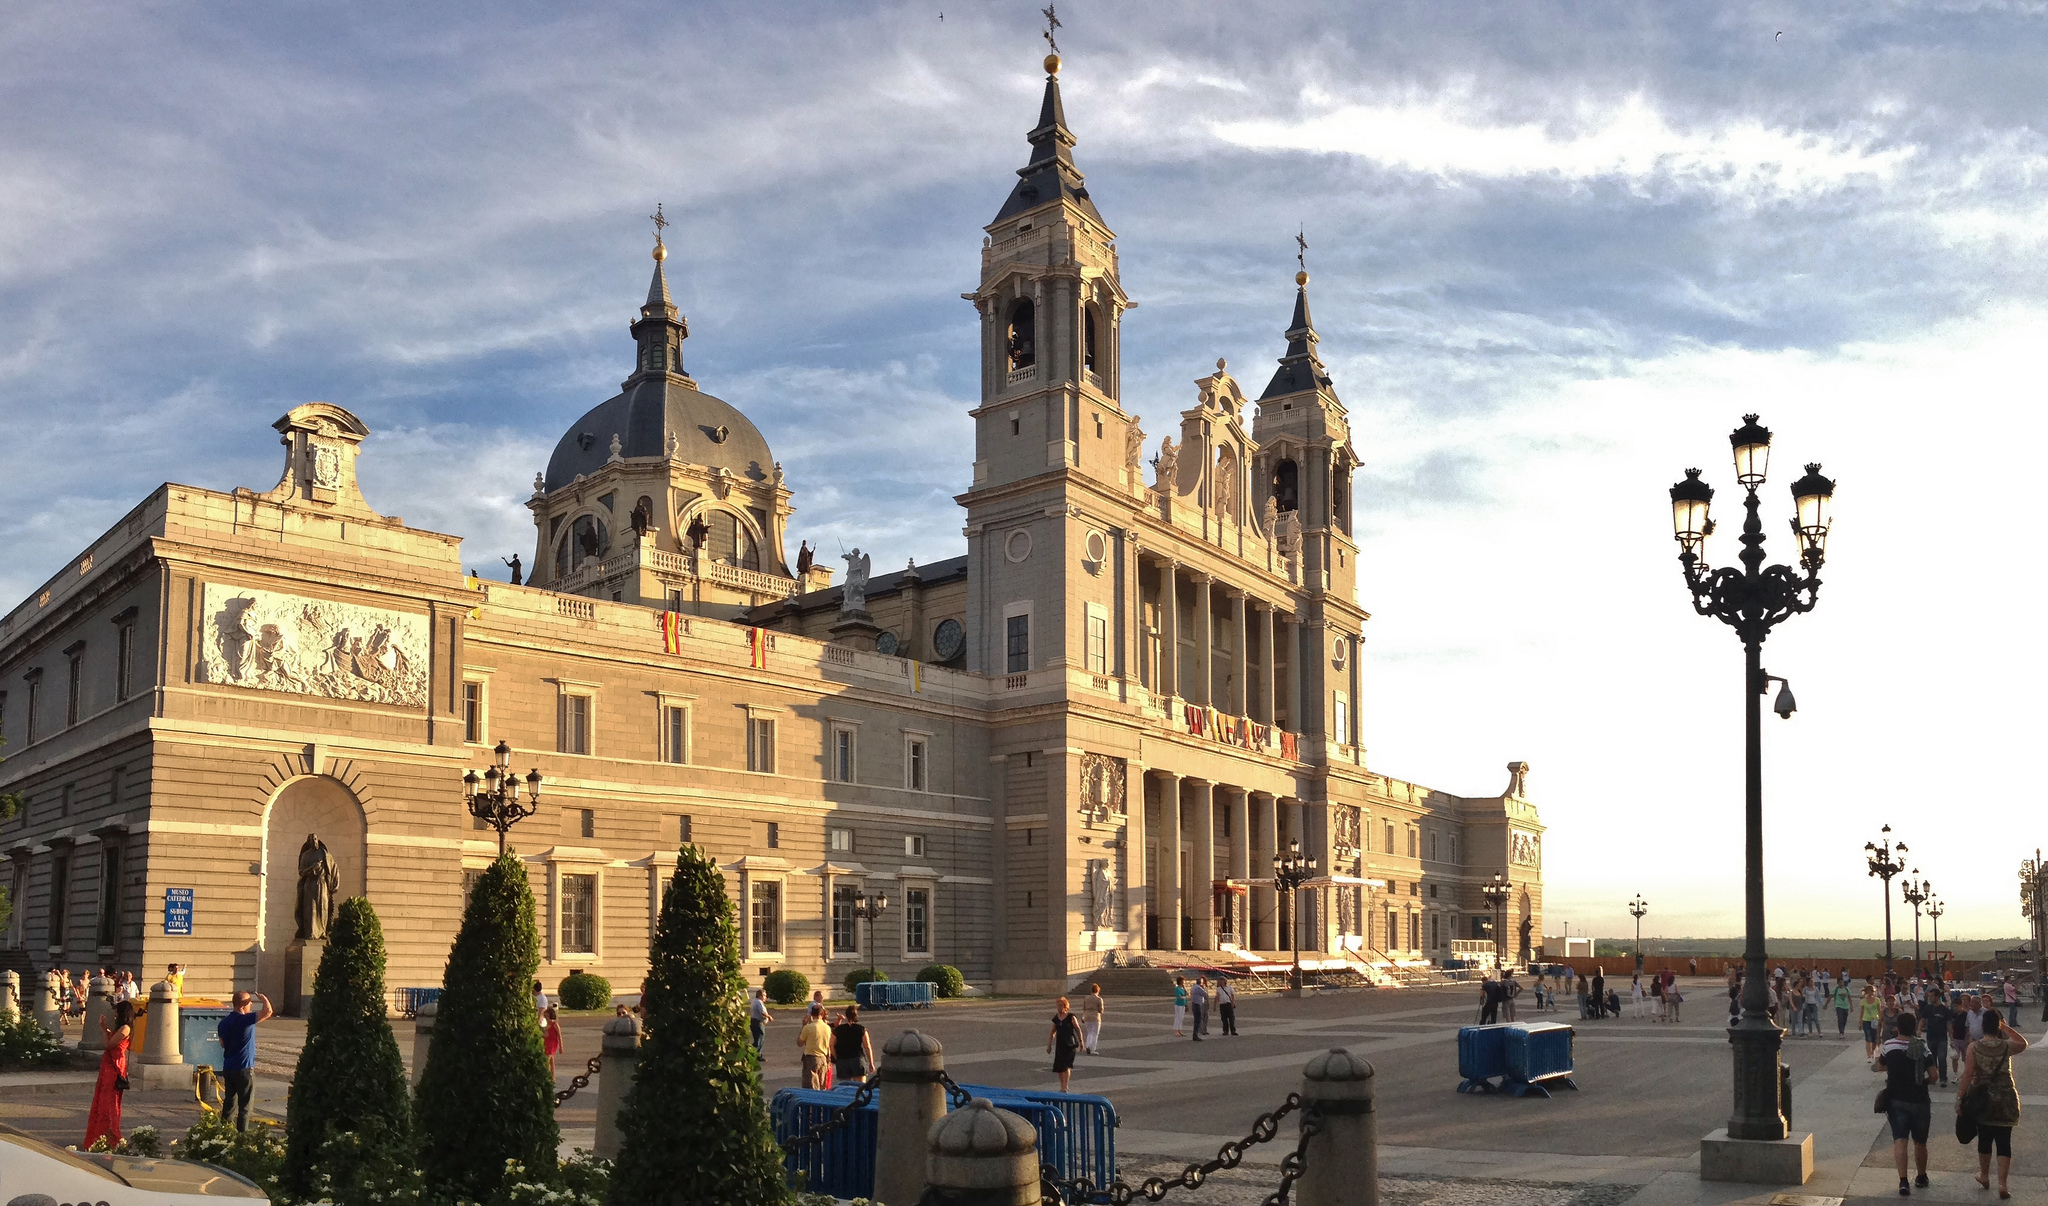 Amazing Almudena Cathedral Pictures & Backgrounds